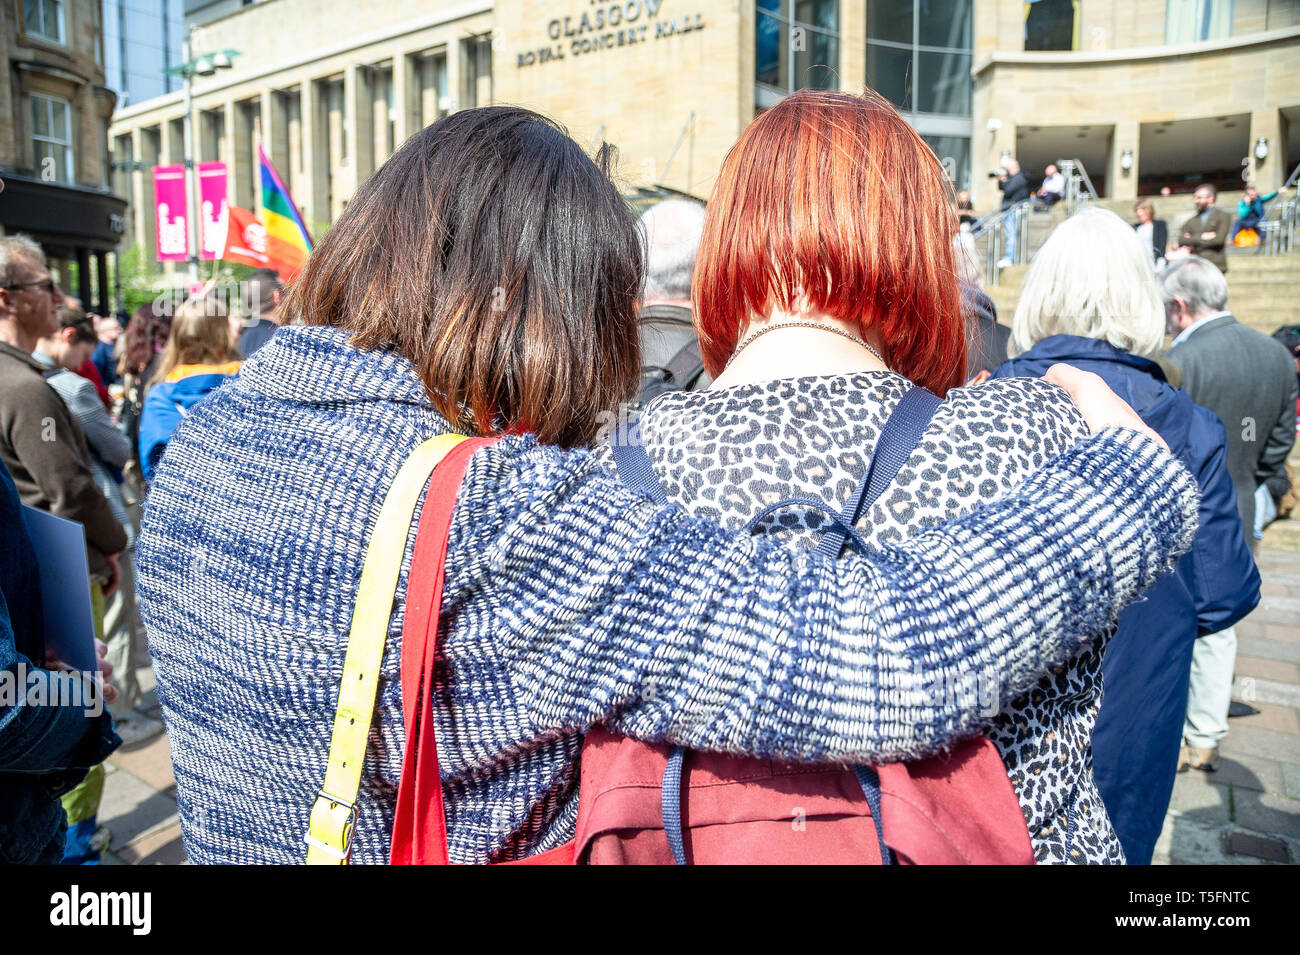 Two women are seen embracing each other during the vigil. People turned out to pay their respects to the Belfast born journalist Lyra McKee, 29, who was shot dead by members of the New IRA whilst while covering riots that were happening in Derry, also known as Londonderry. The NUJ Glasgow branch held a vigil for those wishing to pay their respects for the slain journalist. Stock Photo